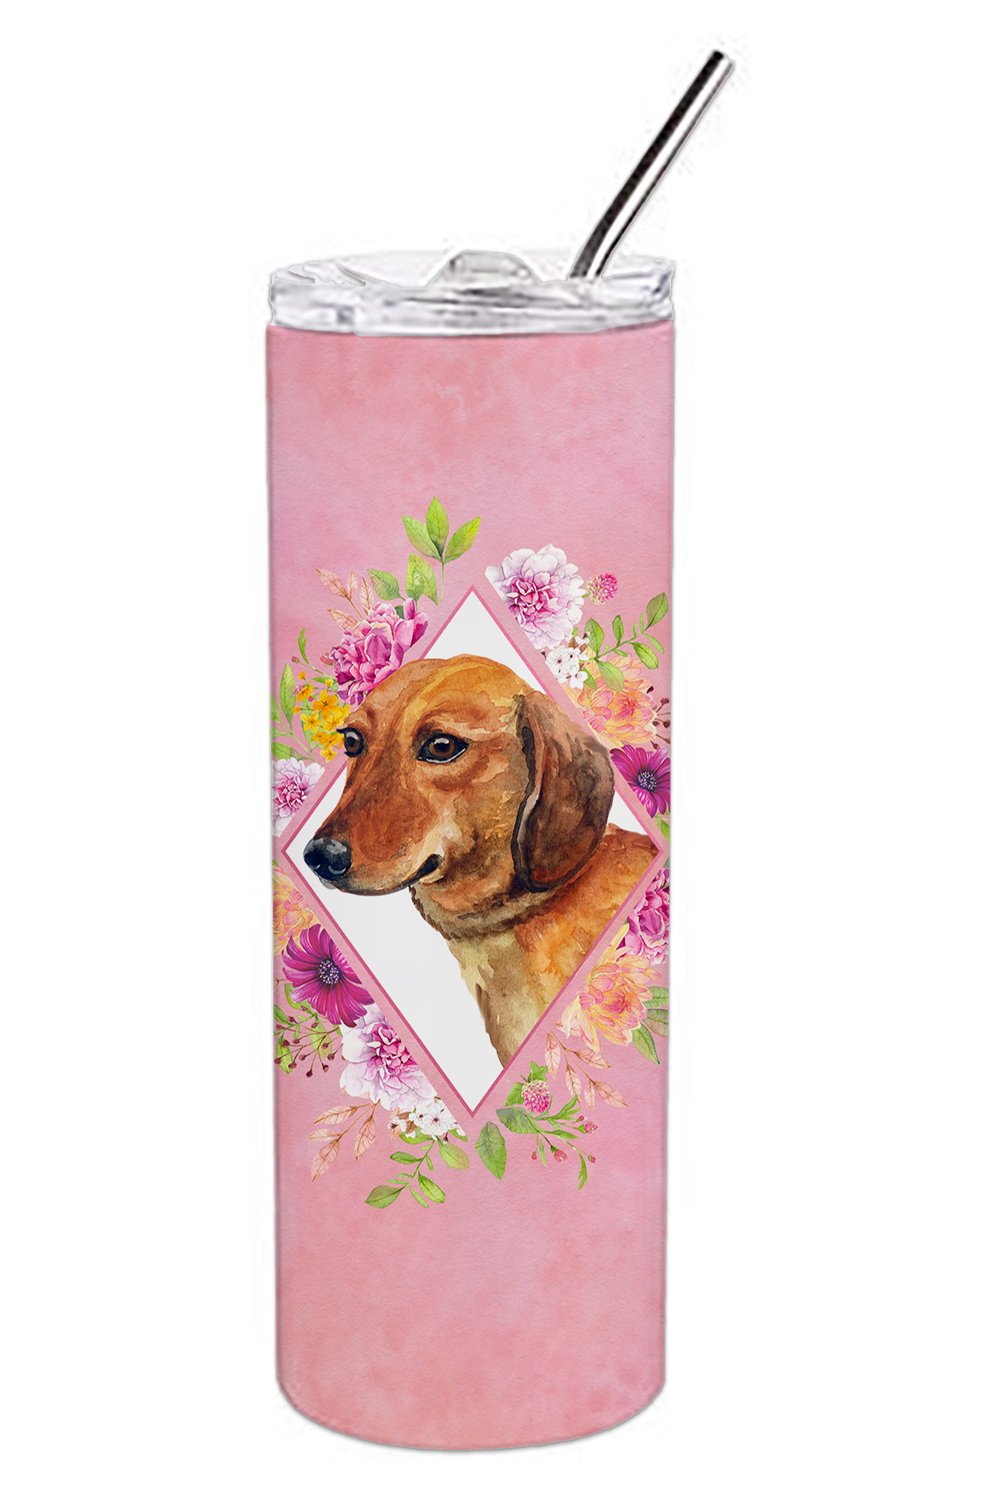 Dachshund Red #1 Pink Flowers Double Walled Stainless Steel 20 oz Skinny Tumbler CK4134TBL20 by Caroline's Treasures